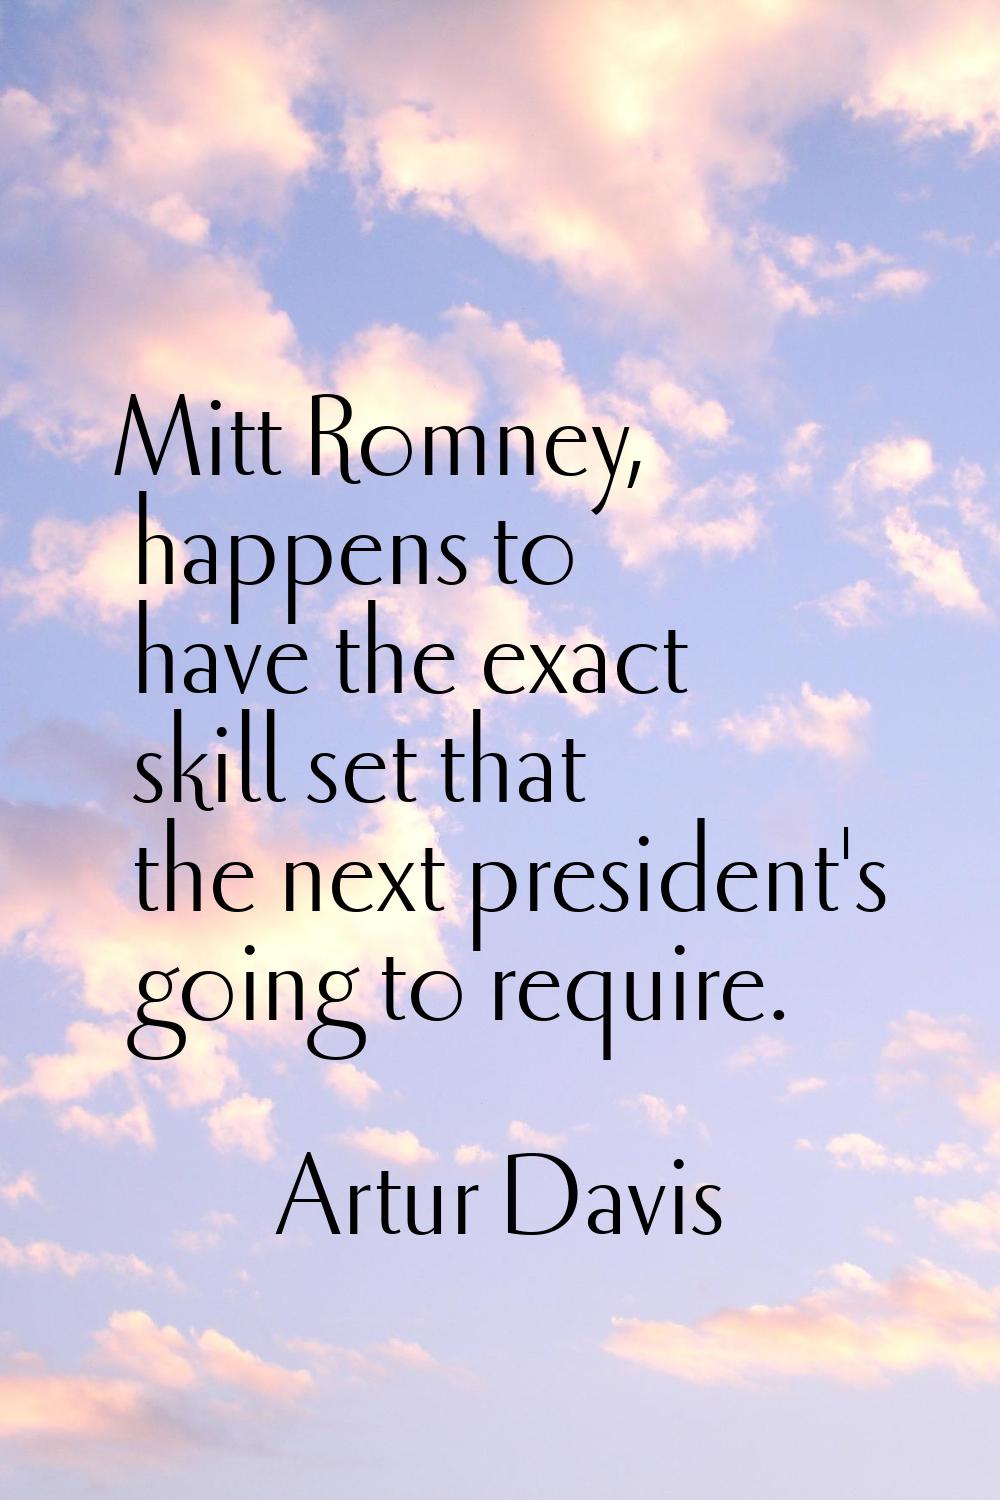 Mitt Romney, happens to have the exact skill set that the next president's going to require.